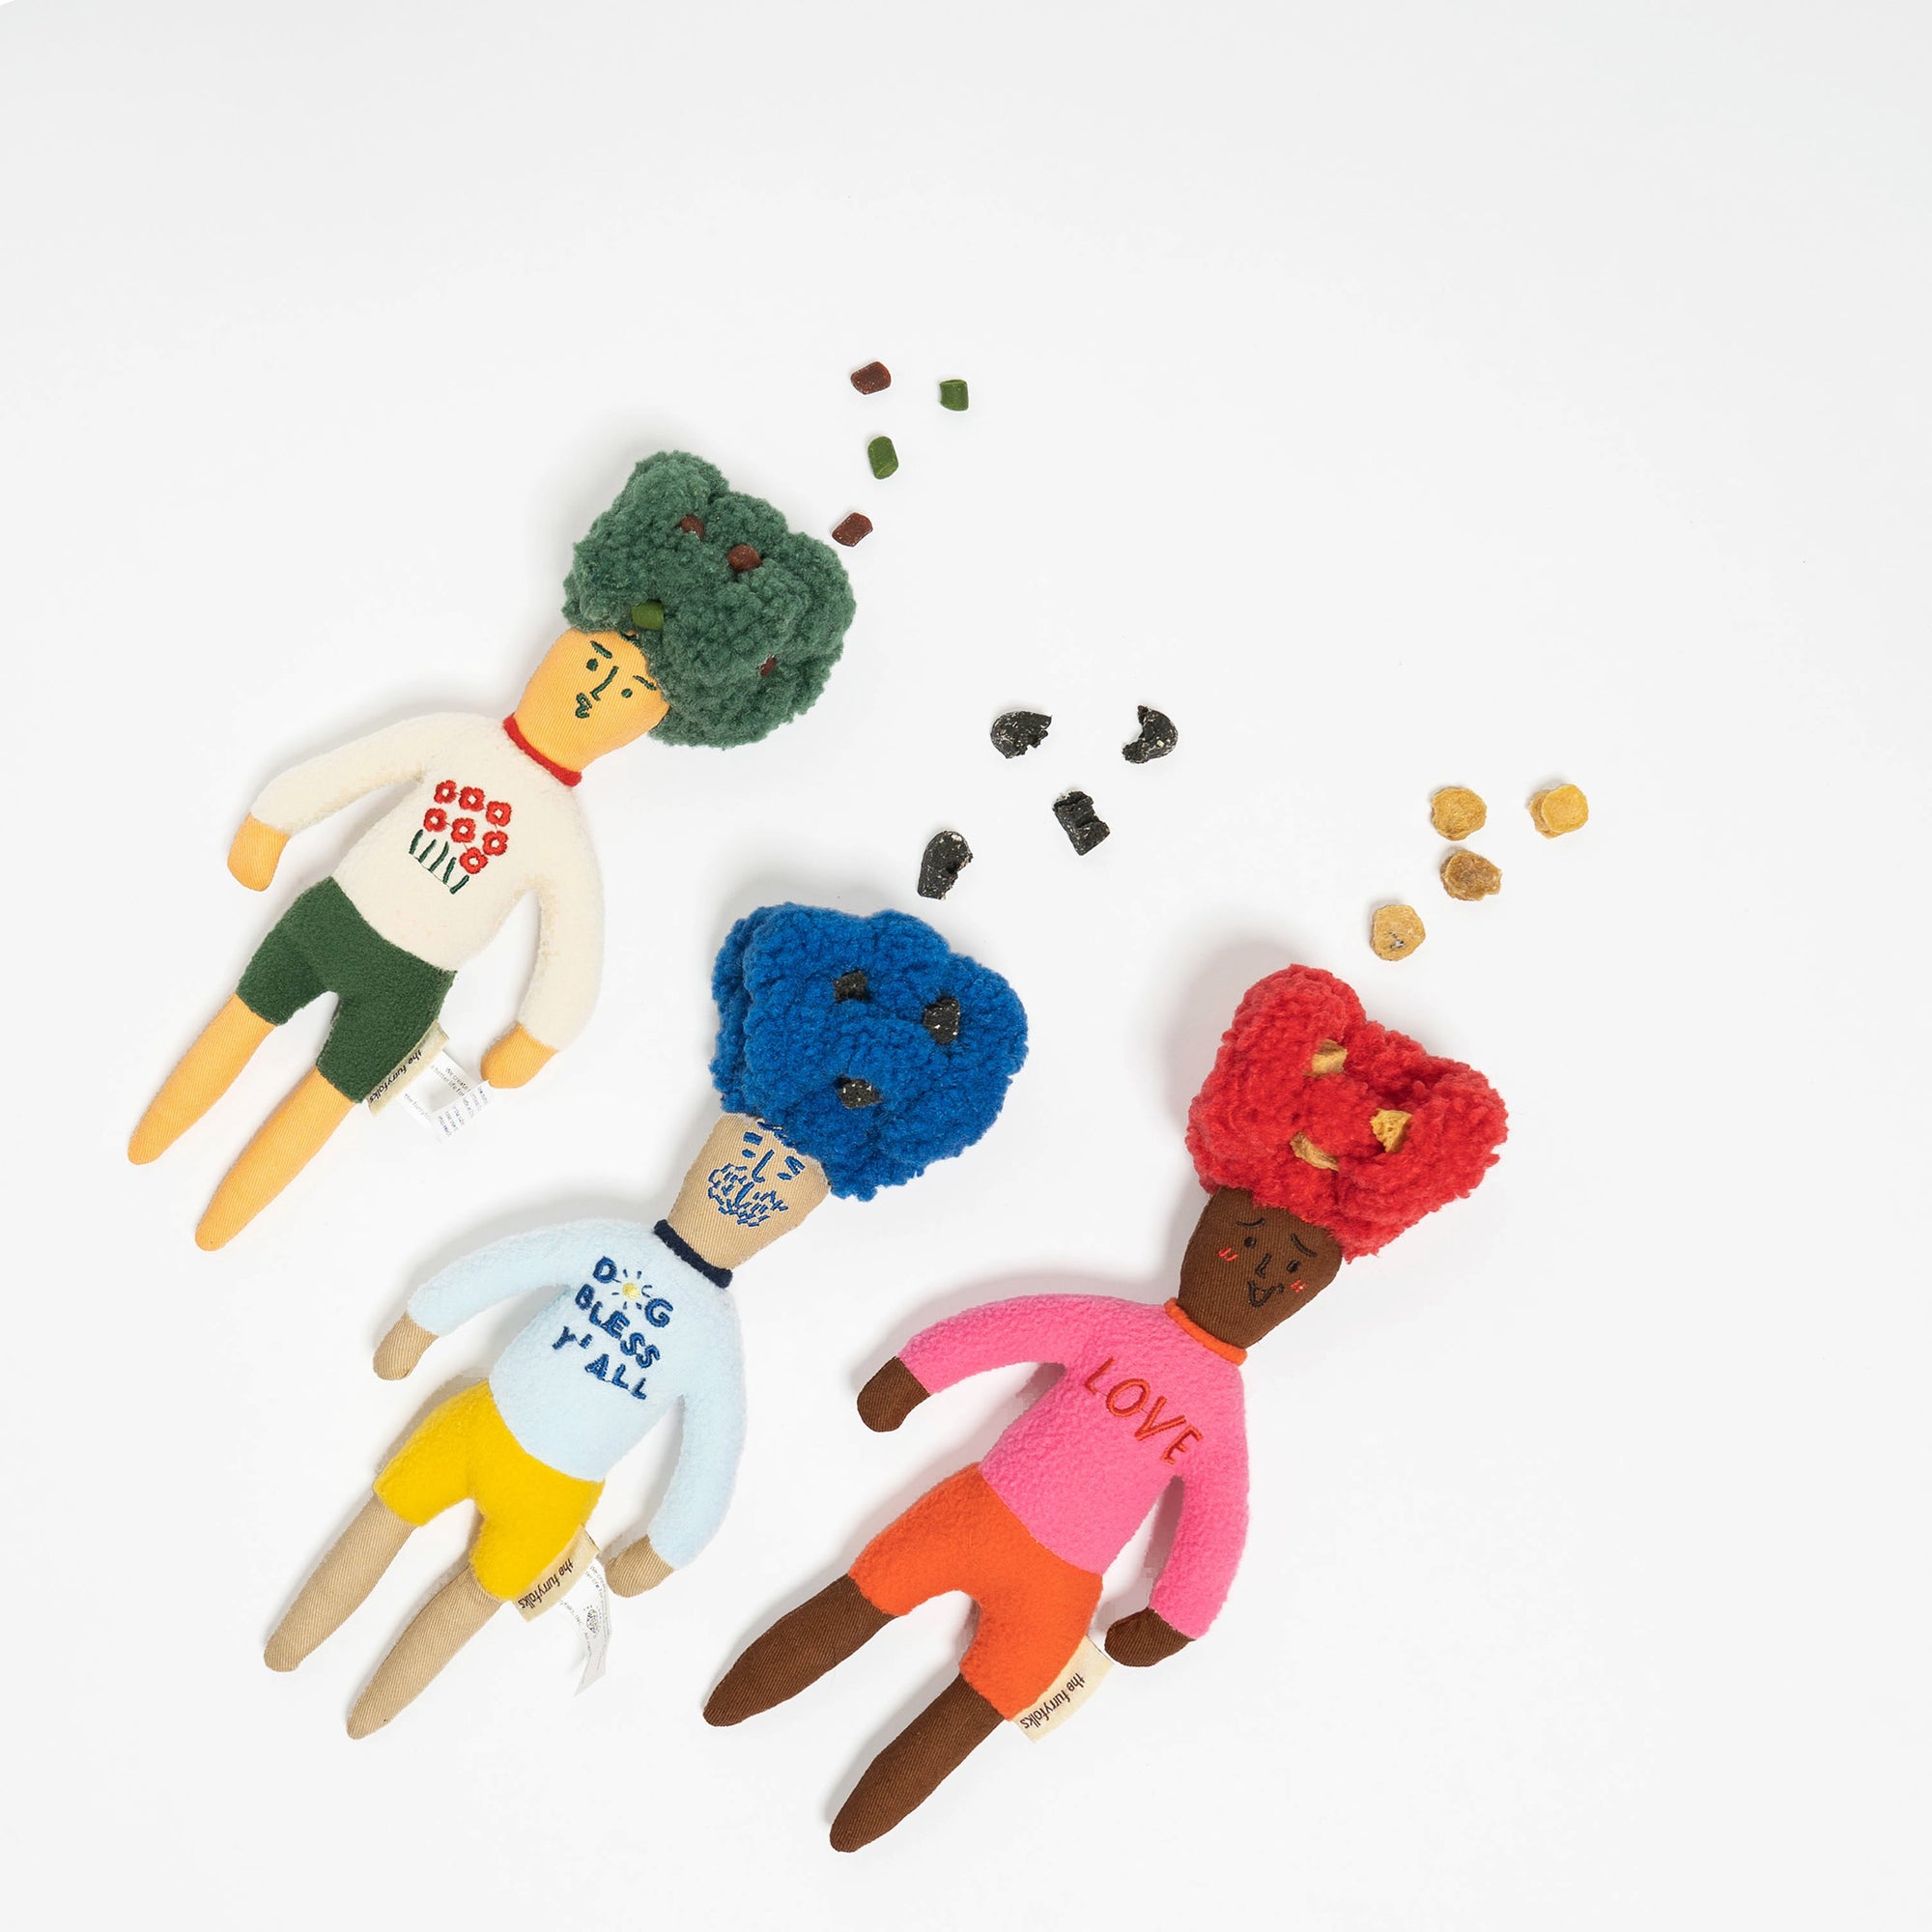 The image shows three dog toys designed as dolls with colorful yarn hair, each paired with different treats on a white background. These toys are for nosework training, allowing dogs to sniff out the treats hidden inside. With green, blue, and red hair, and treats scattered around, they combine functionality with a playful aesthetic, perfect for engaging a dog's sense of smell and providing mental stimulation.